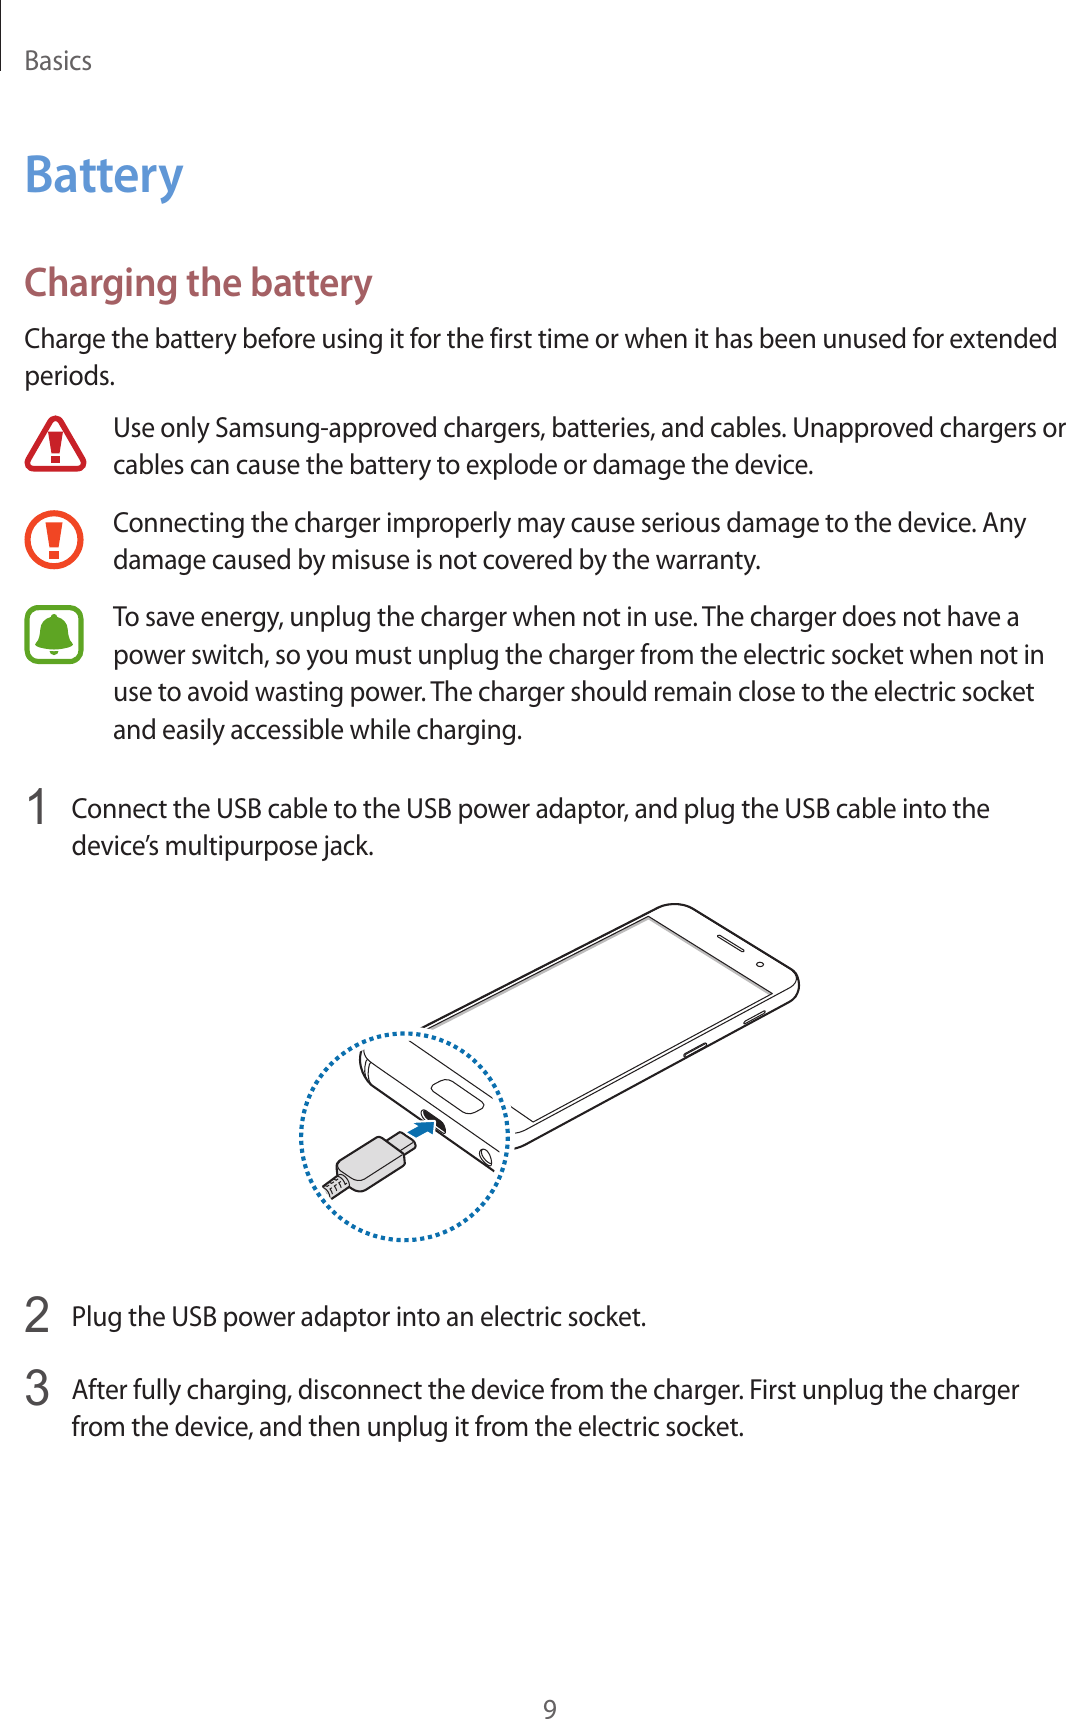 Basics9BatteryCharging the batteryCharge the battery before using it for the first time or when it has been unused for extended periods.Use only Samsung-approved chargers, batteries, and cables. Unapproved chargers or cables can cause the battery to explode or damage the device.Connecting the charger improperly may cause serious damage to the device. Any damage caused by misuse is not covered by the warranty.To save energy, unplug the charger when not in use. The charger does not have a power switch, so you must unplug the charger from the electric socket when not in use to avoid wasting power. The charger should remain close to the electric socket and easily accessible while charging.1  Connect the USB cable to the USB power adaptor, and plug the USB cable into the device’s multipurpose jack.2  Plug the USB power adaptor into an electric socket.3  After fully charging, disconnect the device from the charger. First unplug the charger from the device, and then unplug it from the electric socket.